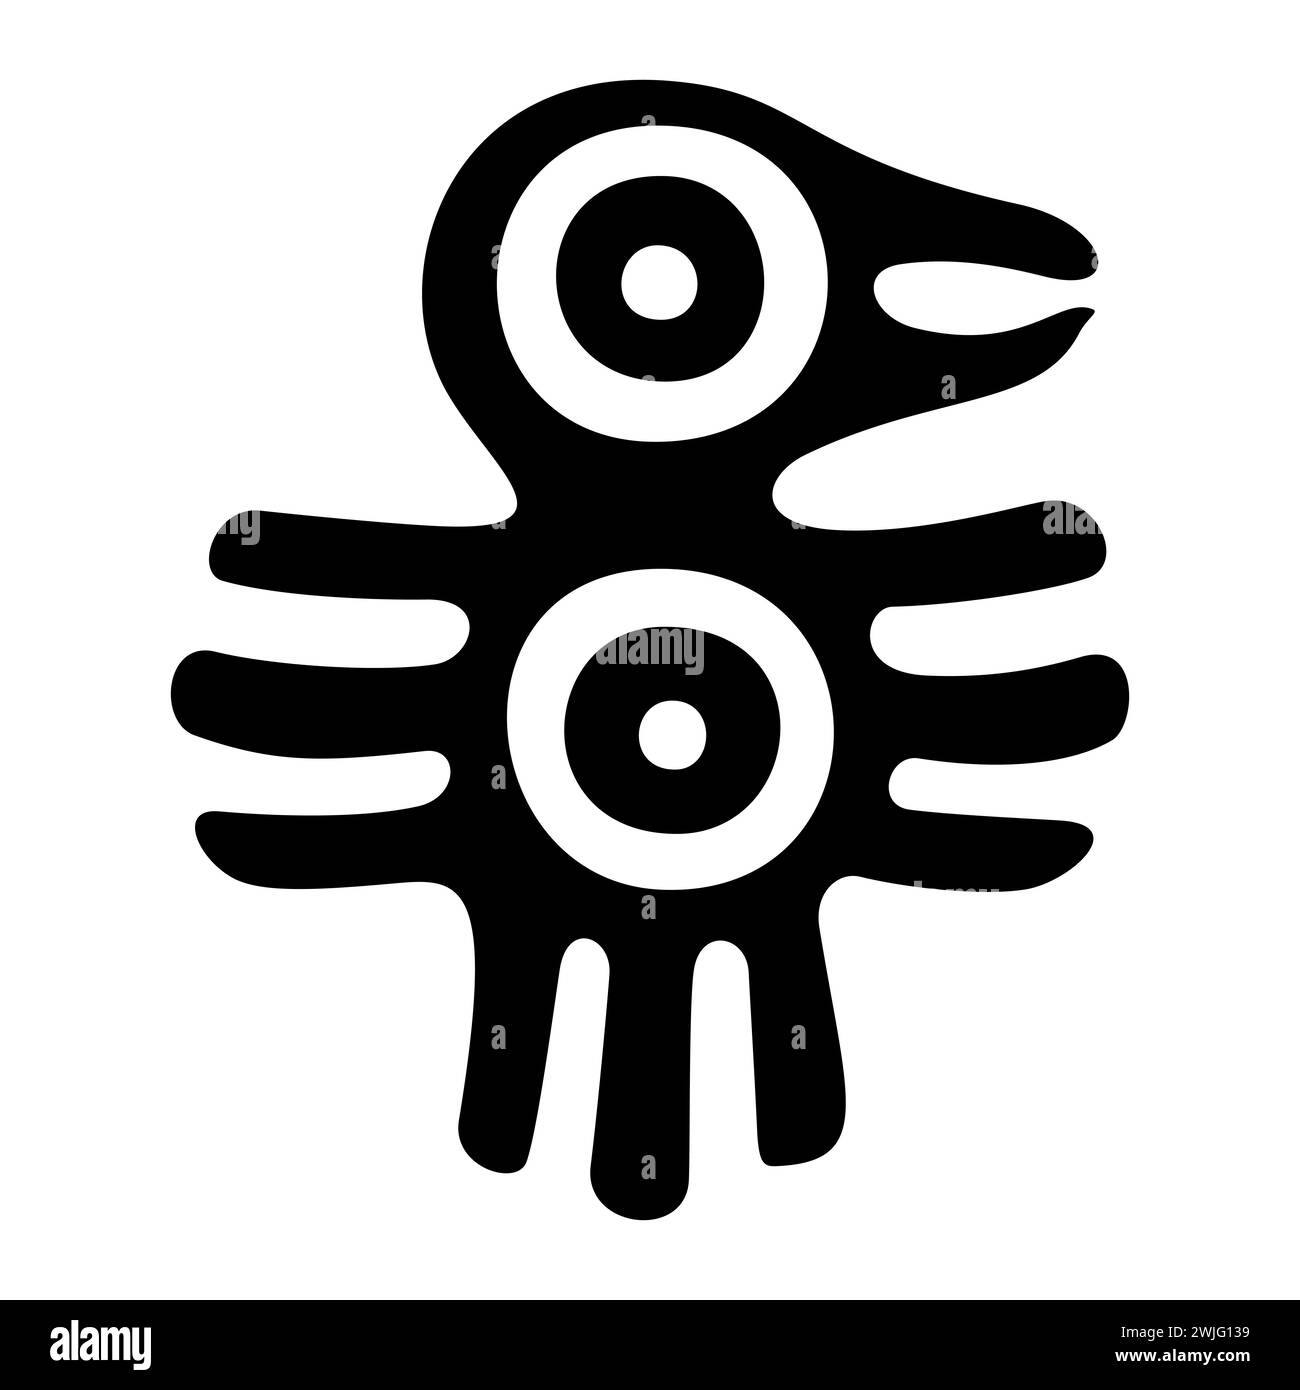 Fantastic bird symbol of ancient Mexico. Decorative Aztec flat stamp motif, showing a bird, as it was found in pre-Columbian Tenochtitlan. Stock Photo